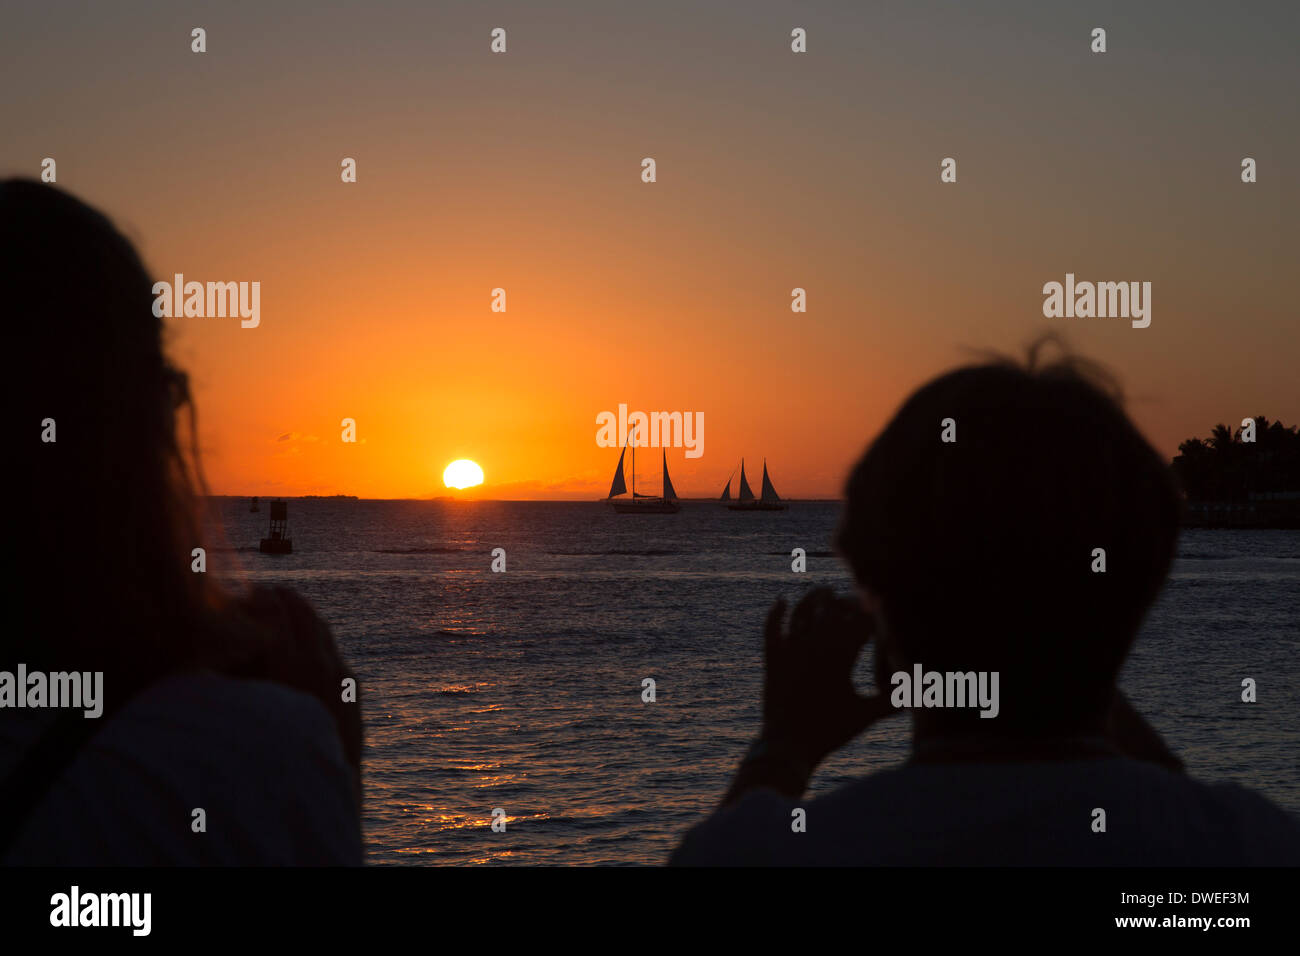 Key West, Florida - Tourists gather in Mallory Square to watch the sunset. Stock Photo